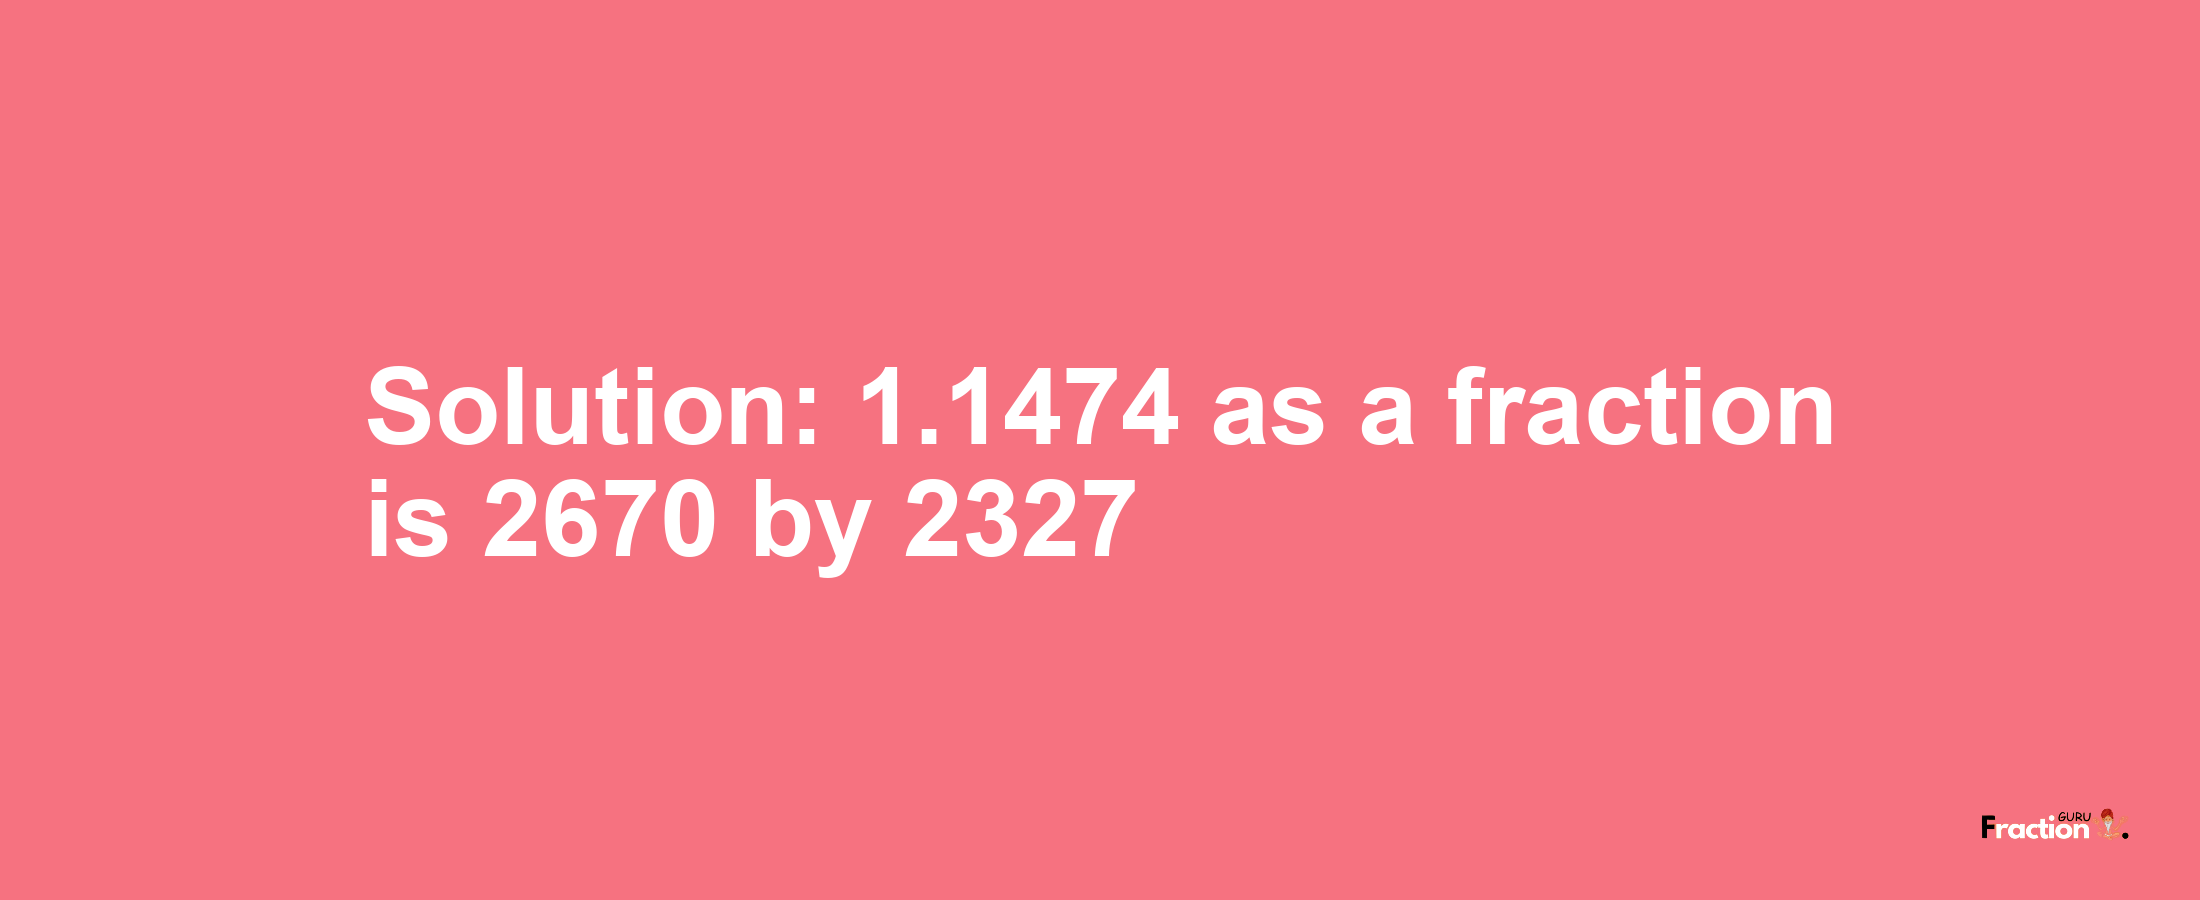 Solution:1.1474 as a fraction is 2670/2327